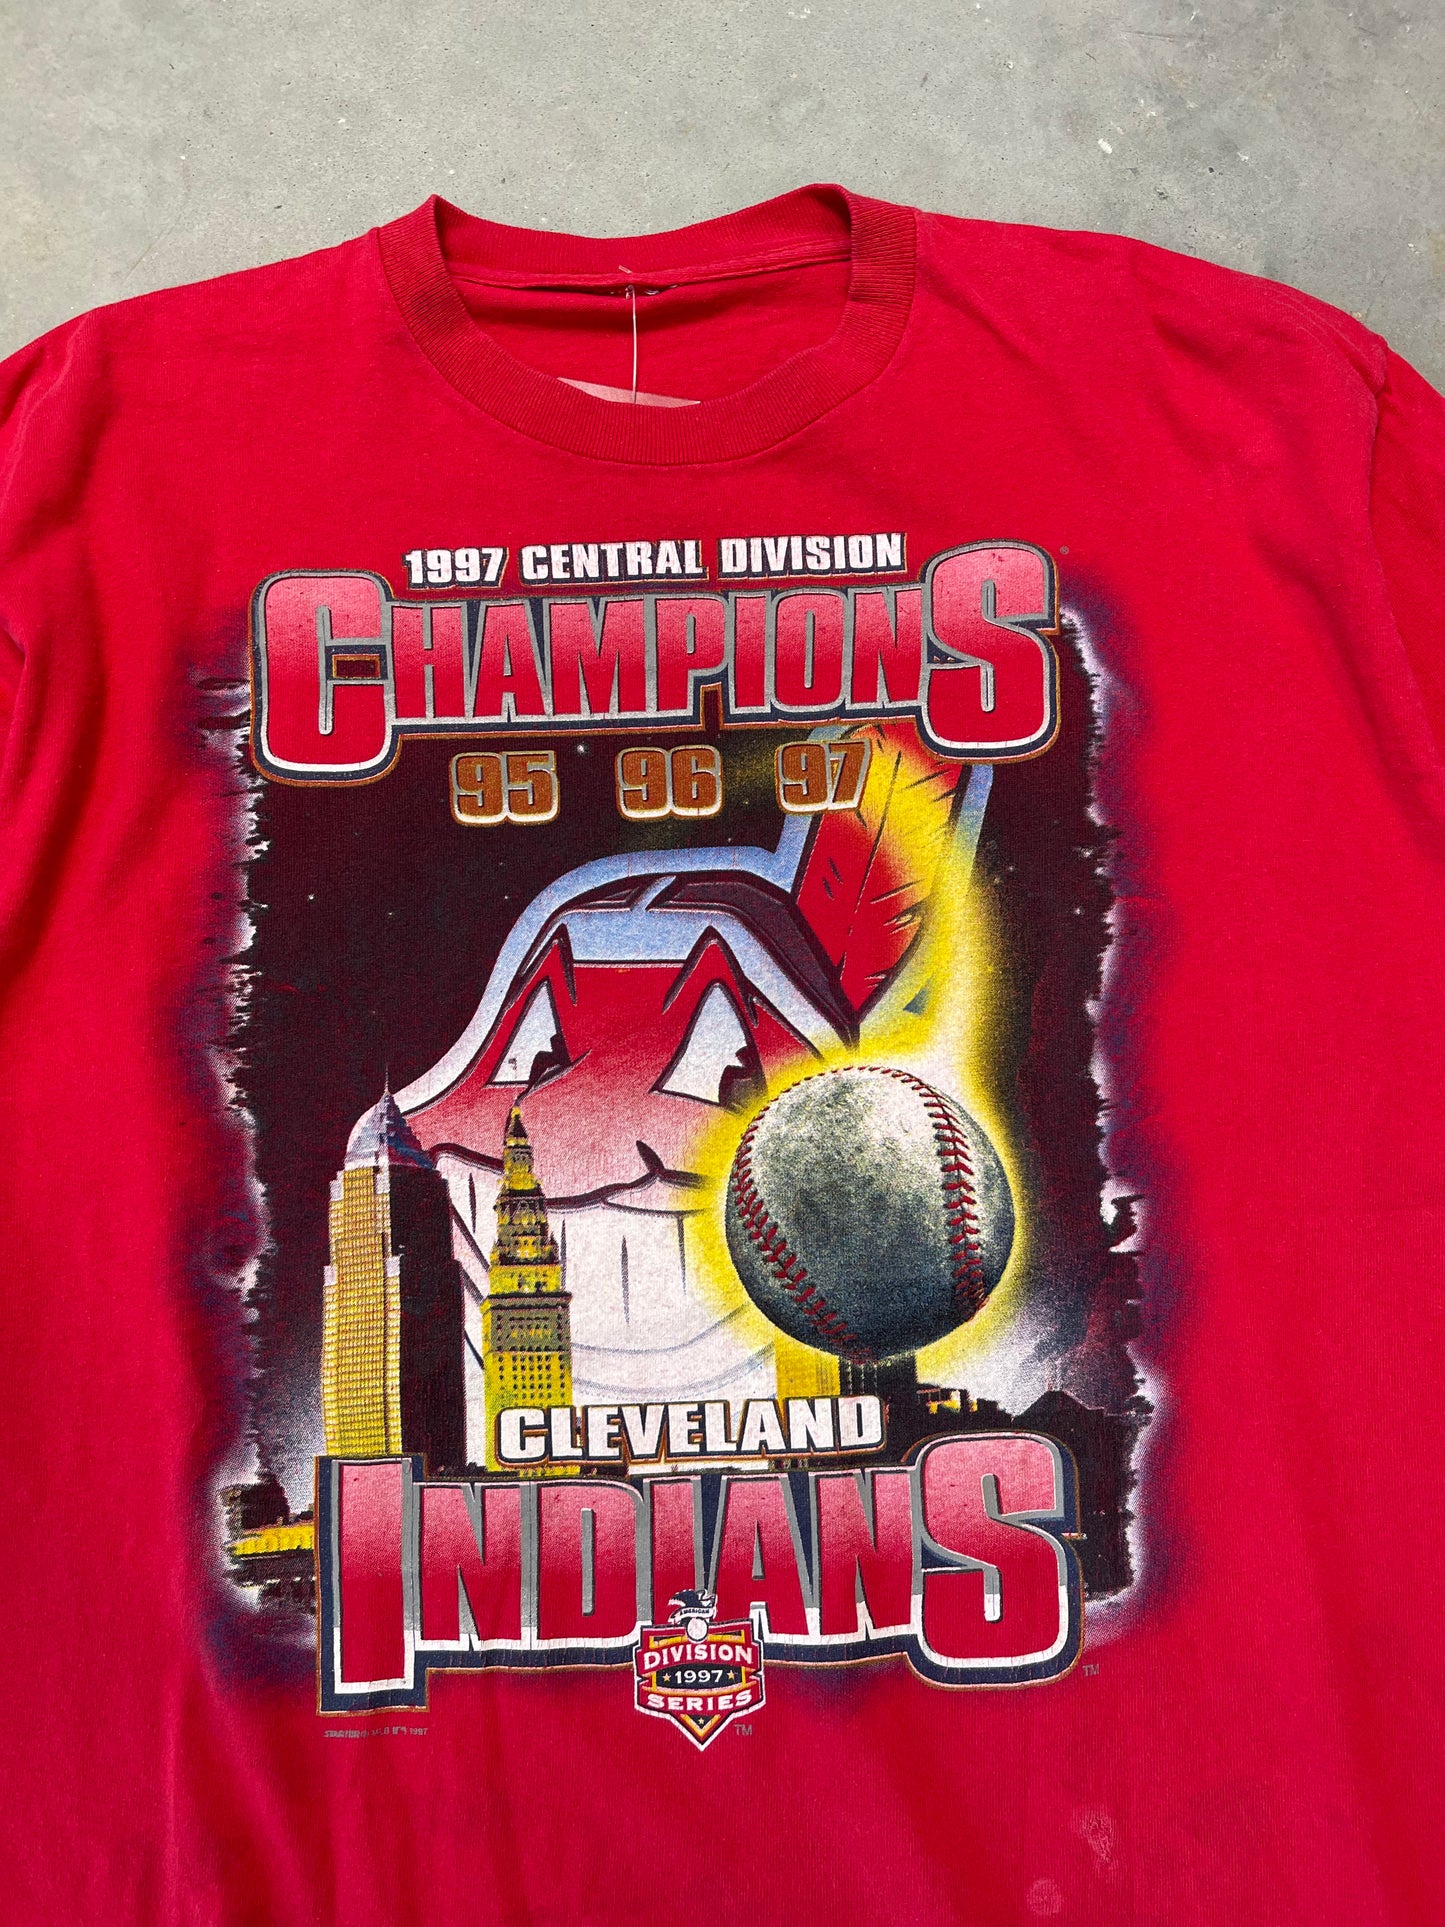 1997 Cleveland Indians Vintage 3 Peat American League Central Division Champions Starter MLB Tee (XL)